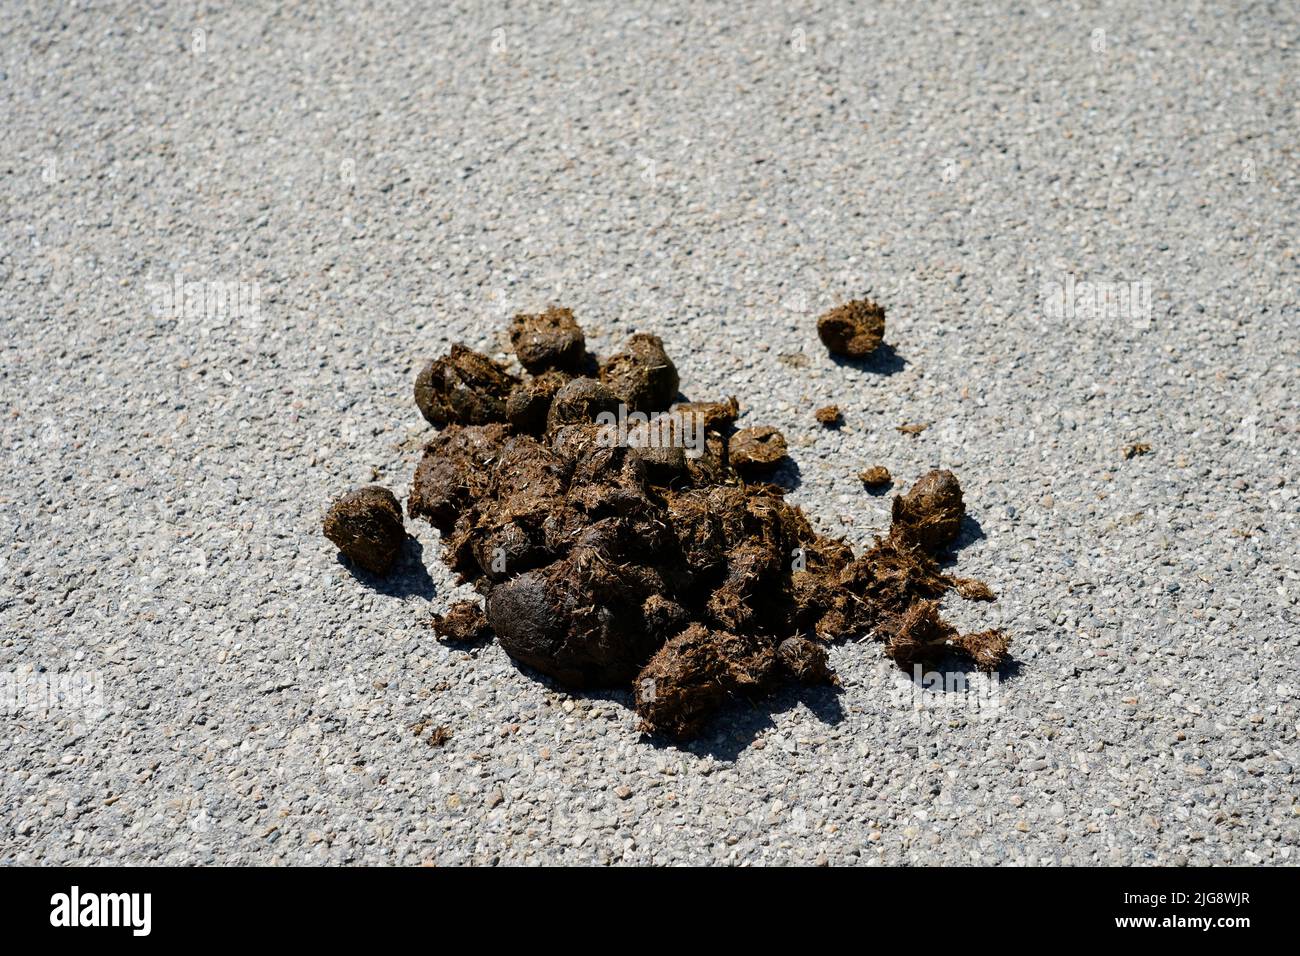 Germany, Bavaria, Upper Bavaria, country road, Altötting district, horse droppings on a country road Stock Photo